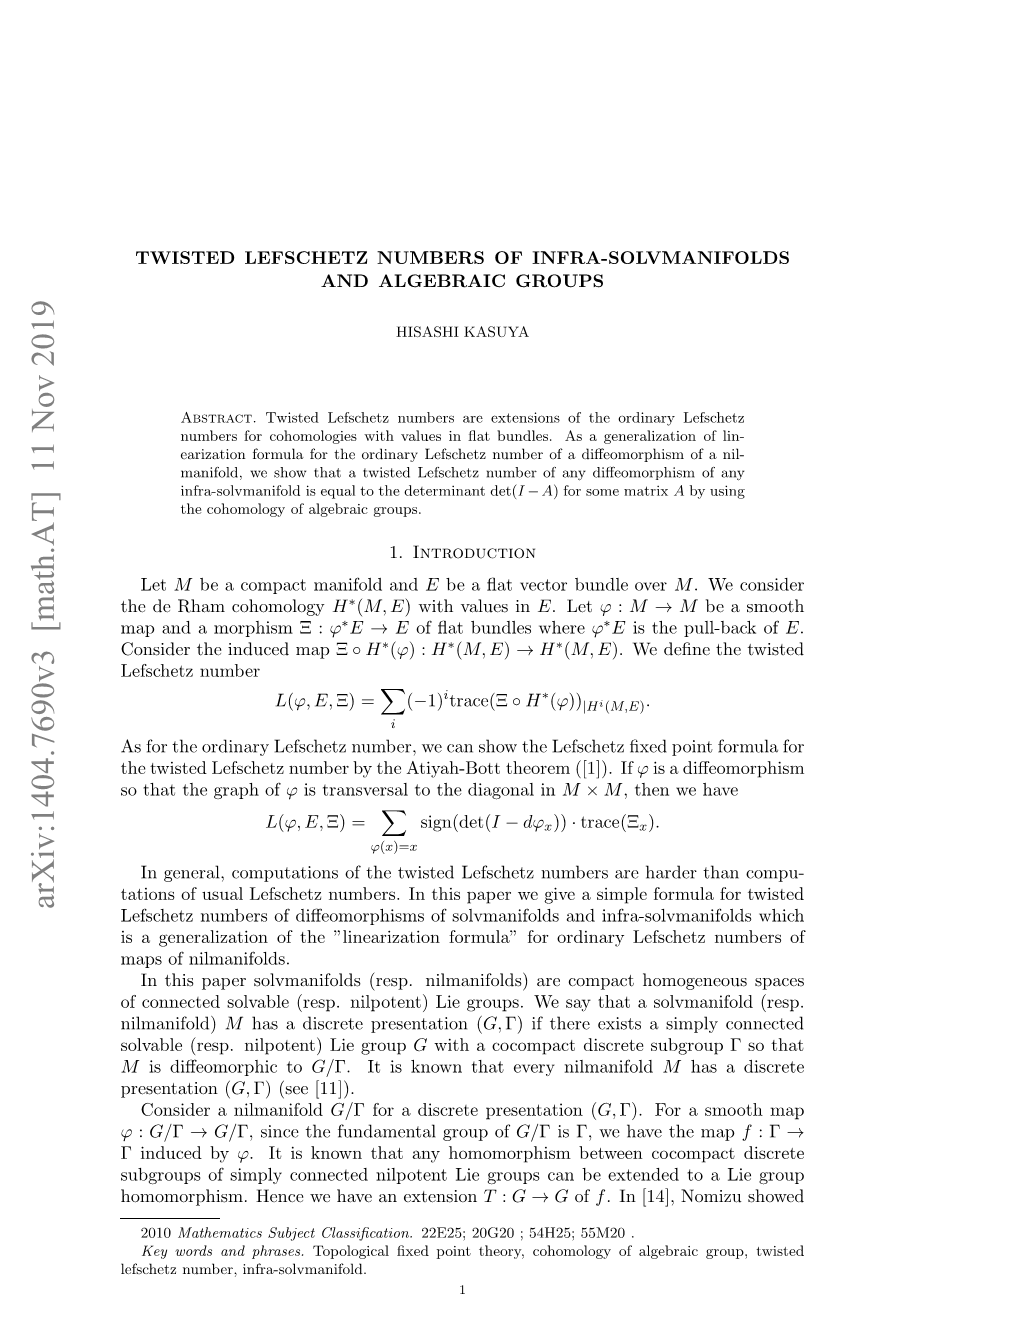 Twisted Lefschetz Numbers of Infra-Solvmanifolds and Algebraic Groups